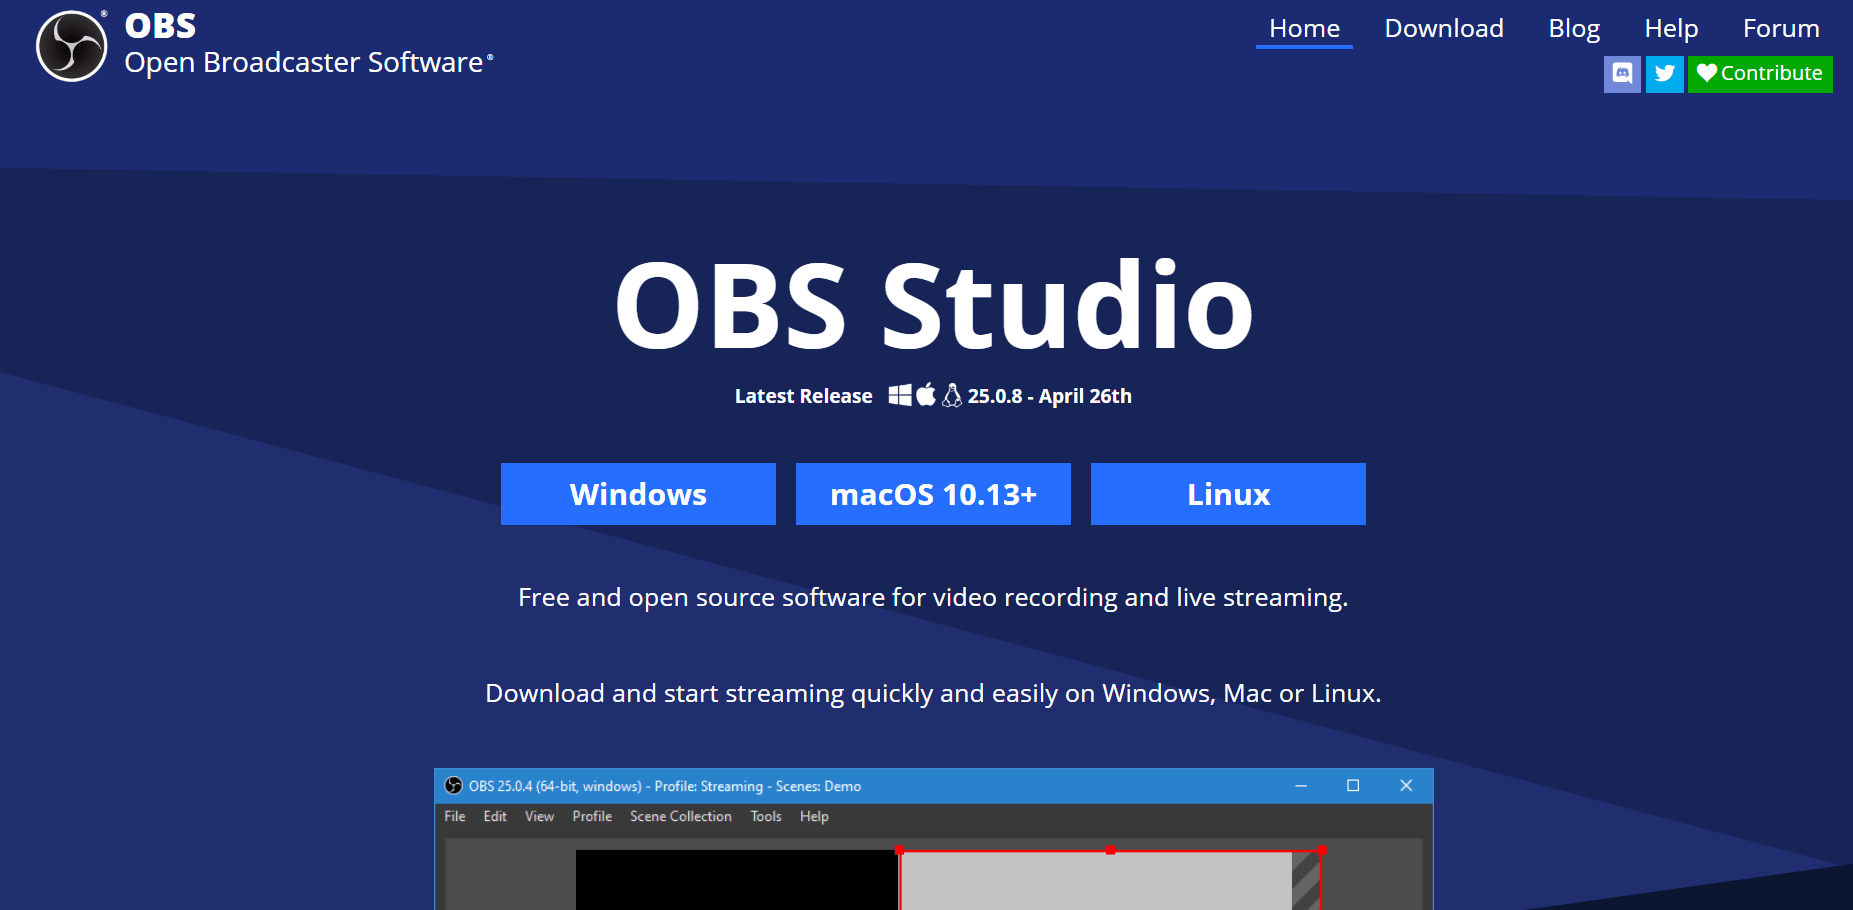 Open Broadcaster Software view